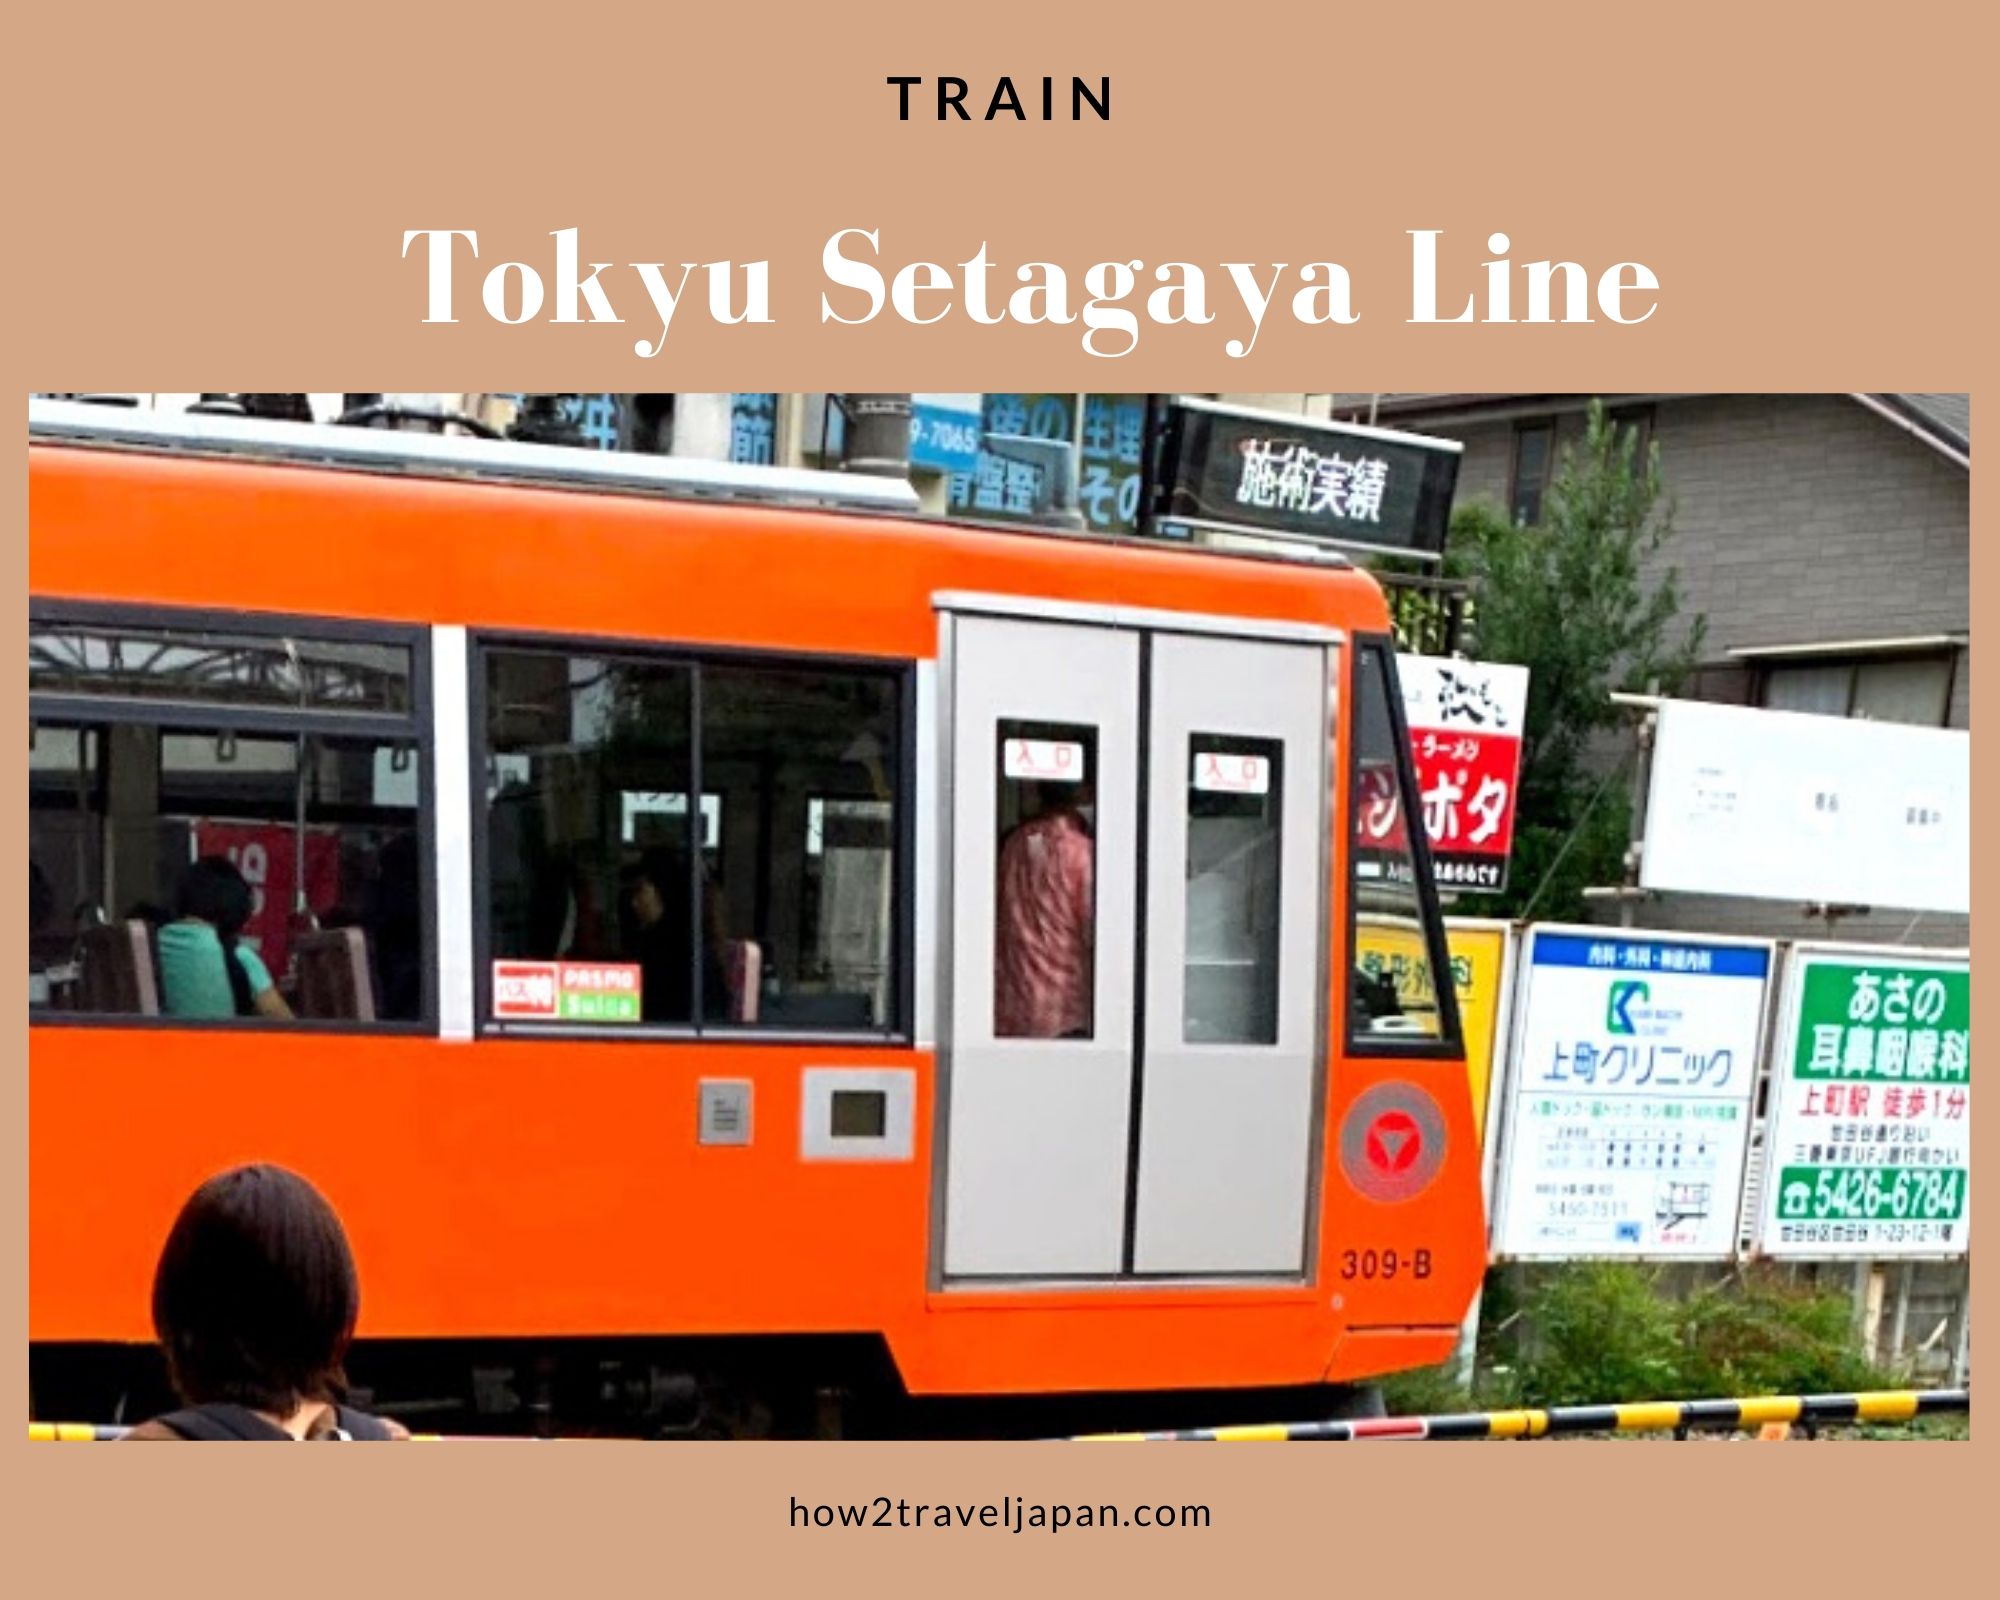 You are currently viewing Tokyu Setagaya Line is operated just close to Shibuya